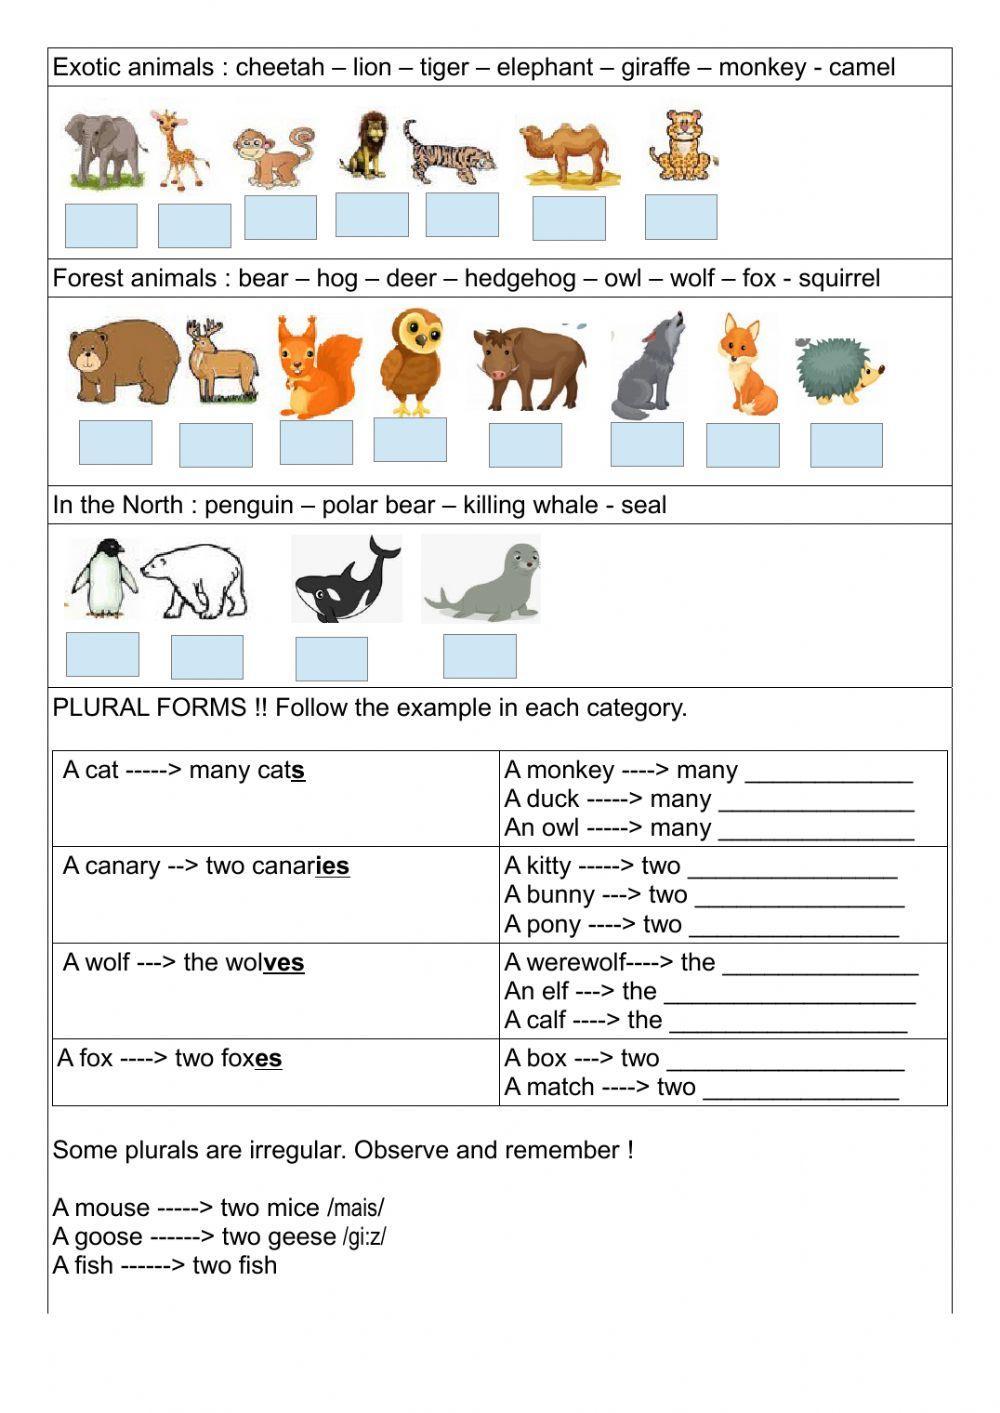 Animal categories and plural